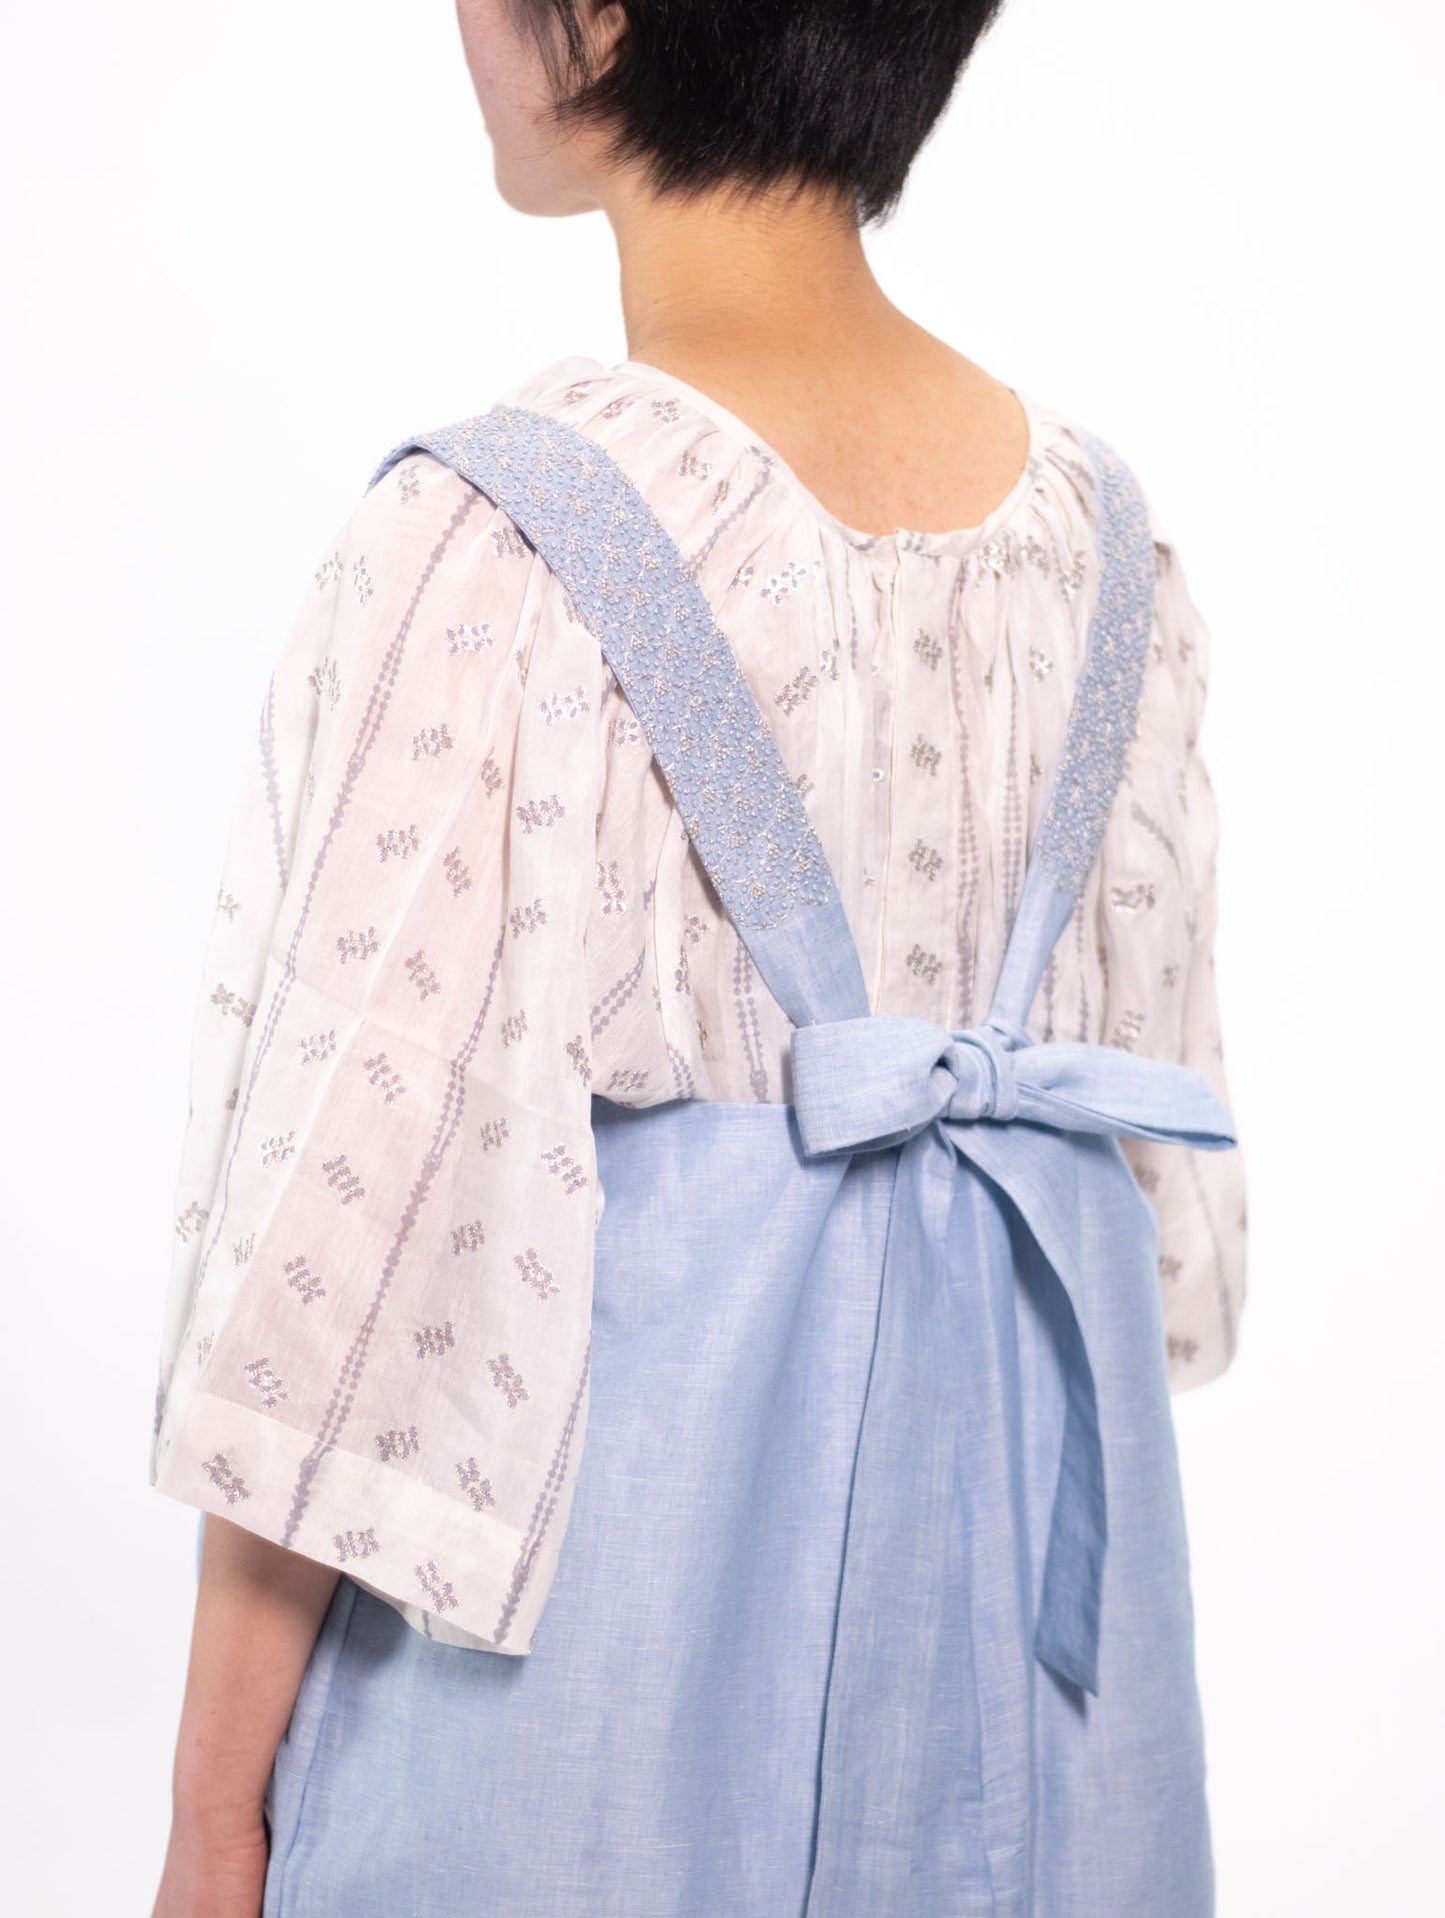 [50% off] Bunon Embroidery Overall - Icy Blue